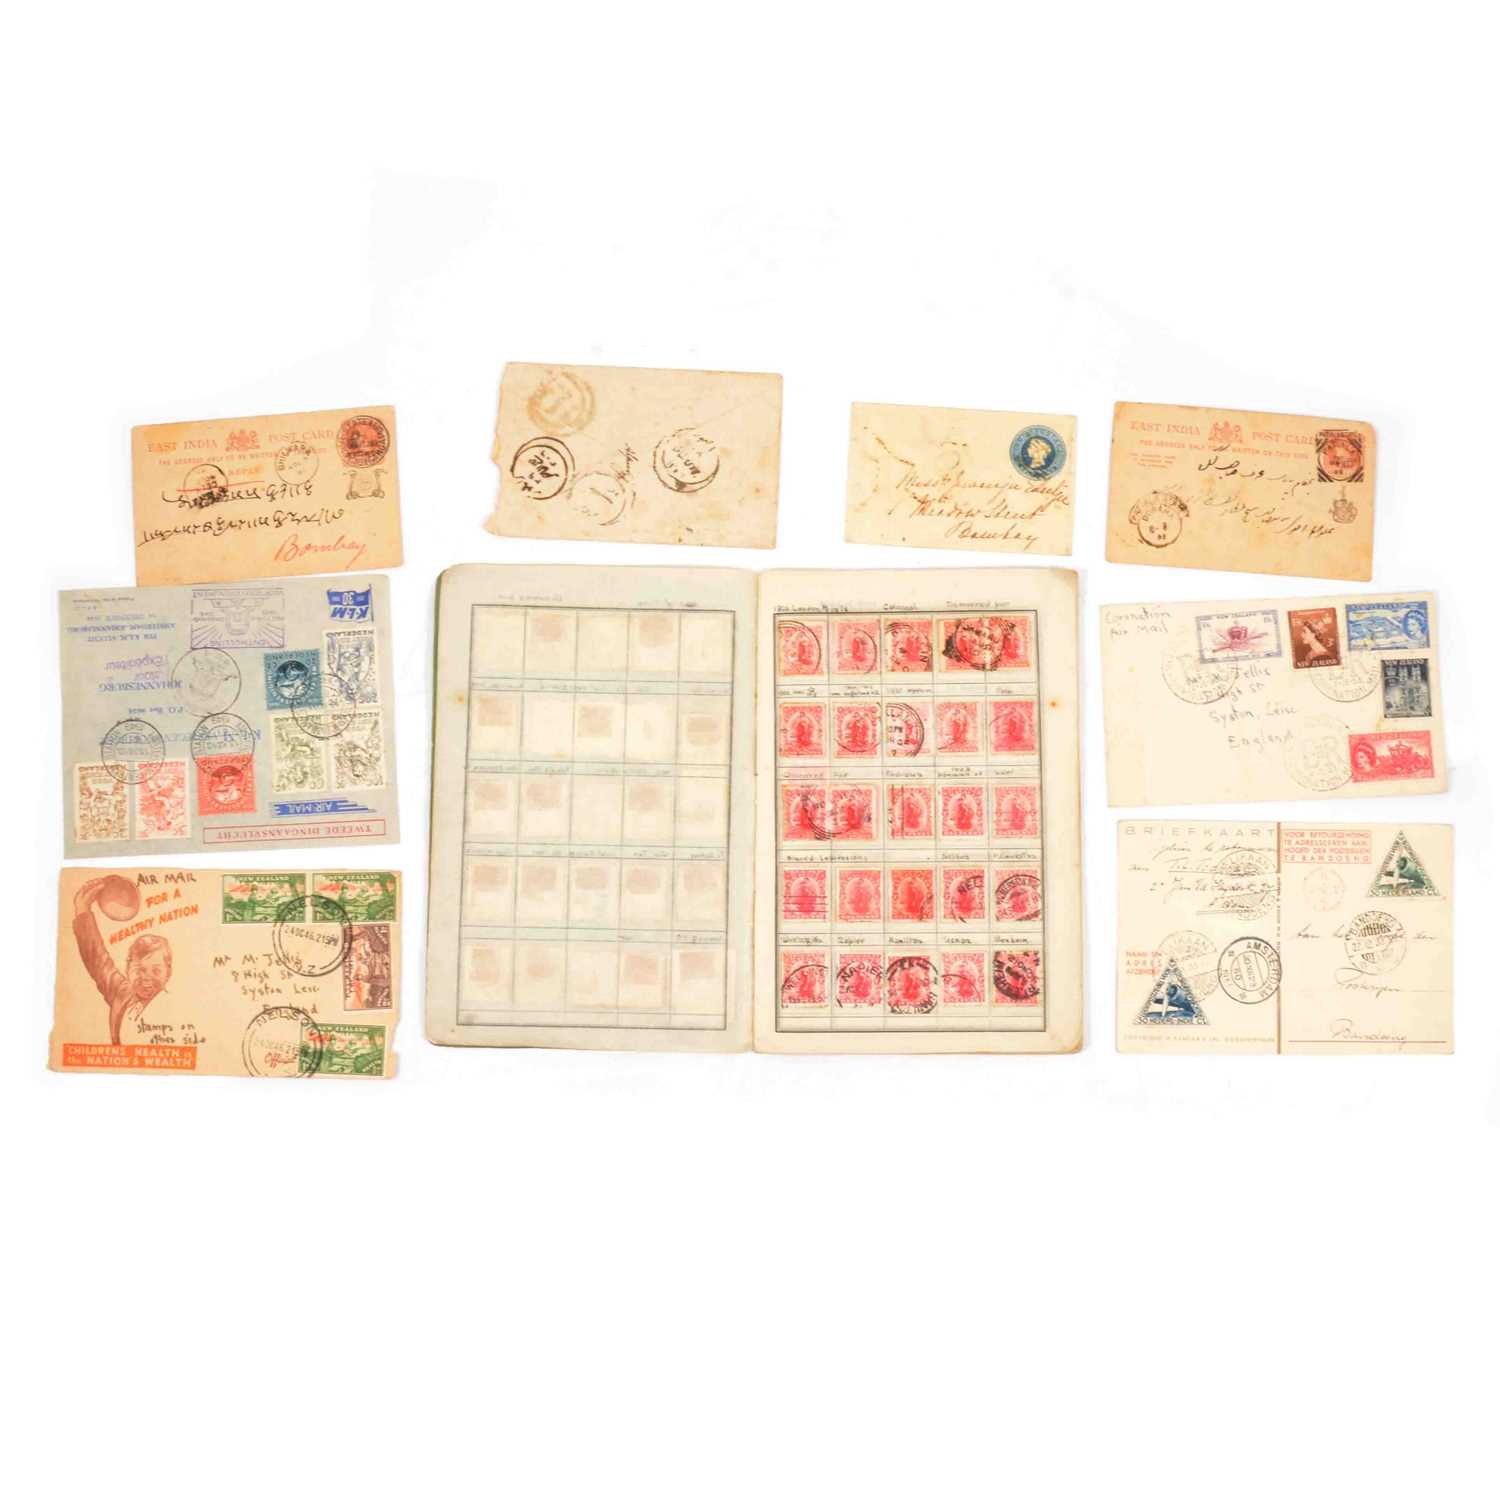 Lot 105 - Stamps: a diverse collection, mostly Empire issues and a booklet of New Zealand issues